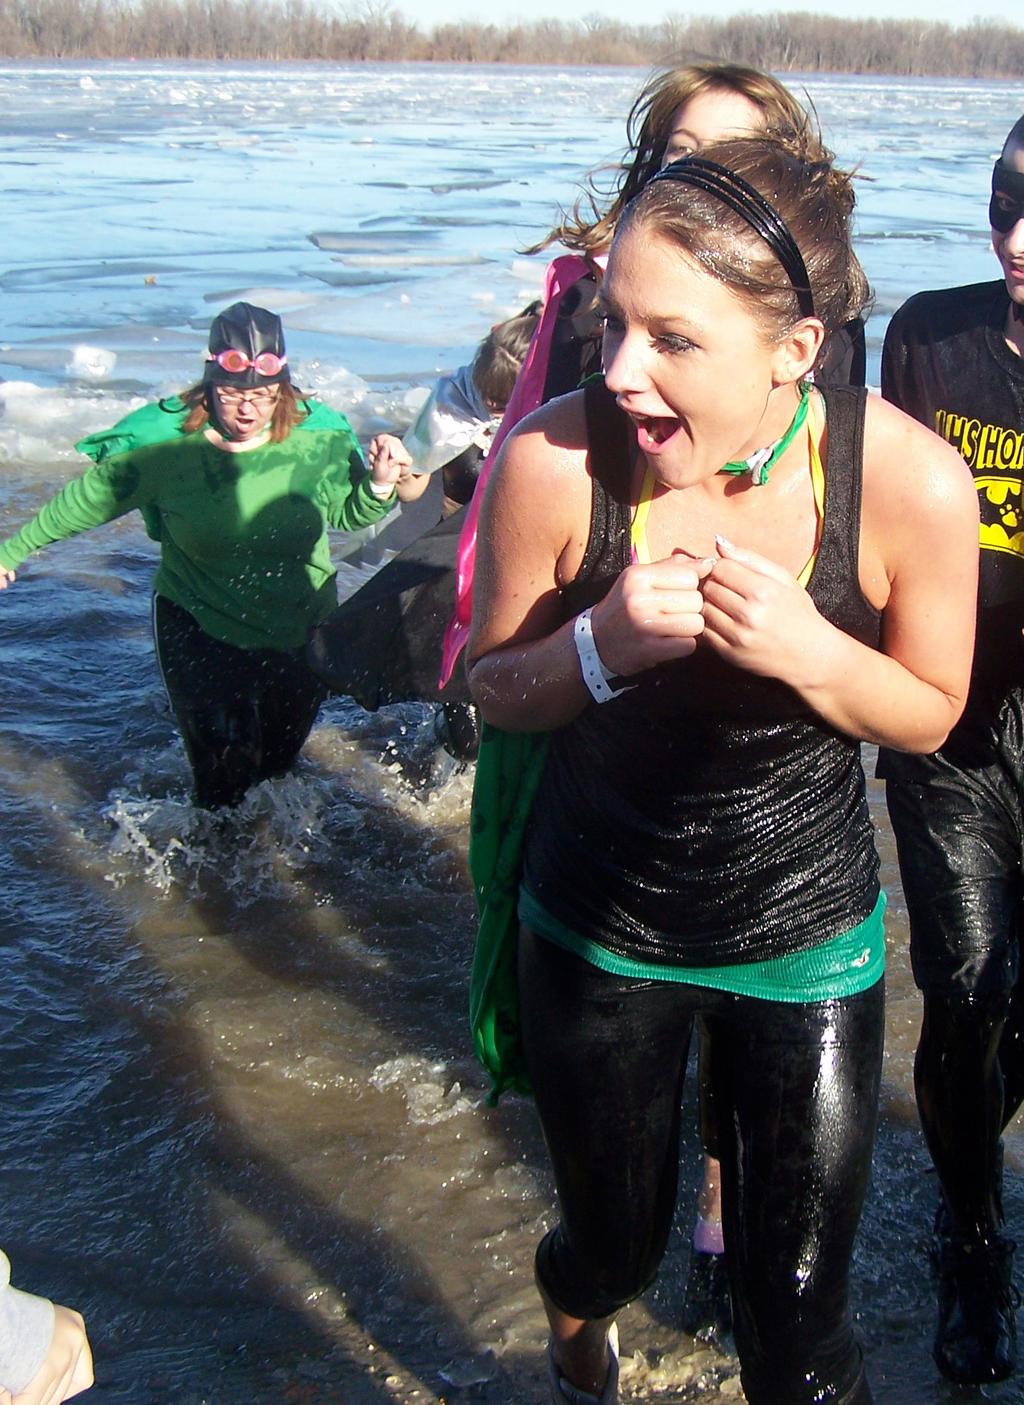 COOL SCHOOL COMPETITION The Cool School competition is a section of the Polar Plunge specifically for students in local Universities, high schools, junior high and middle schools!